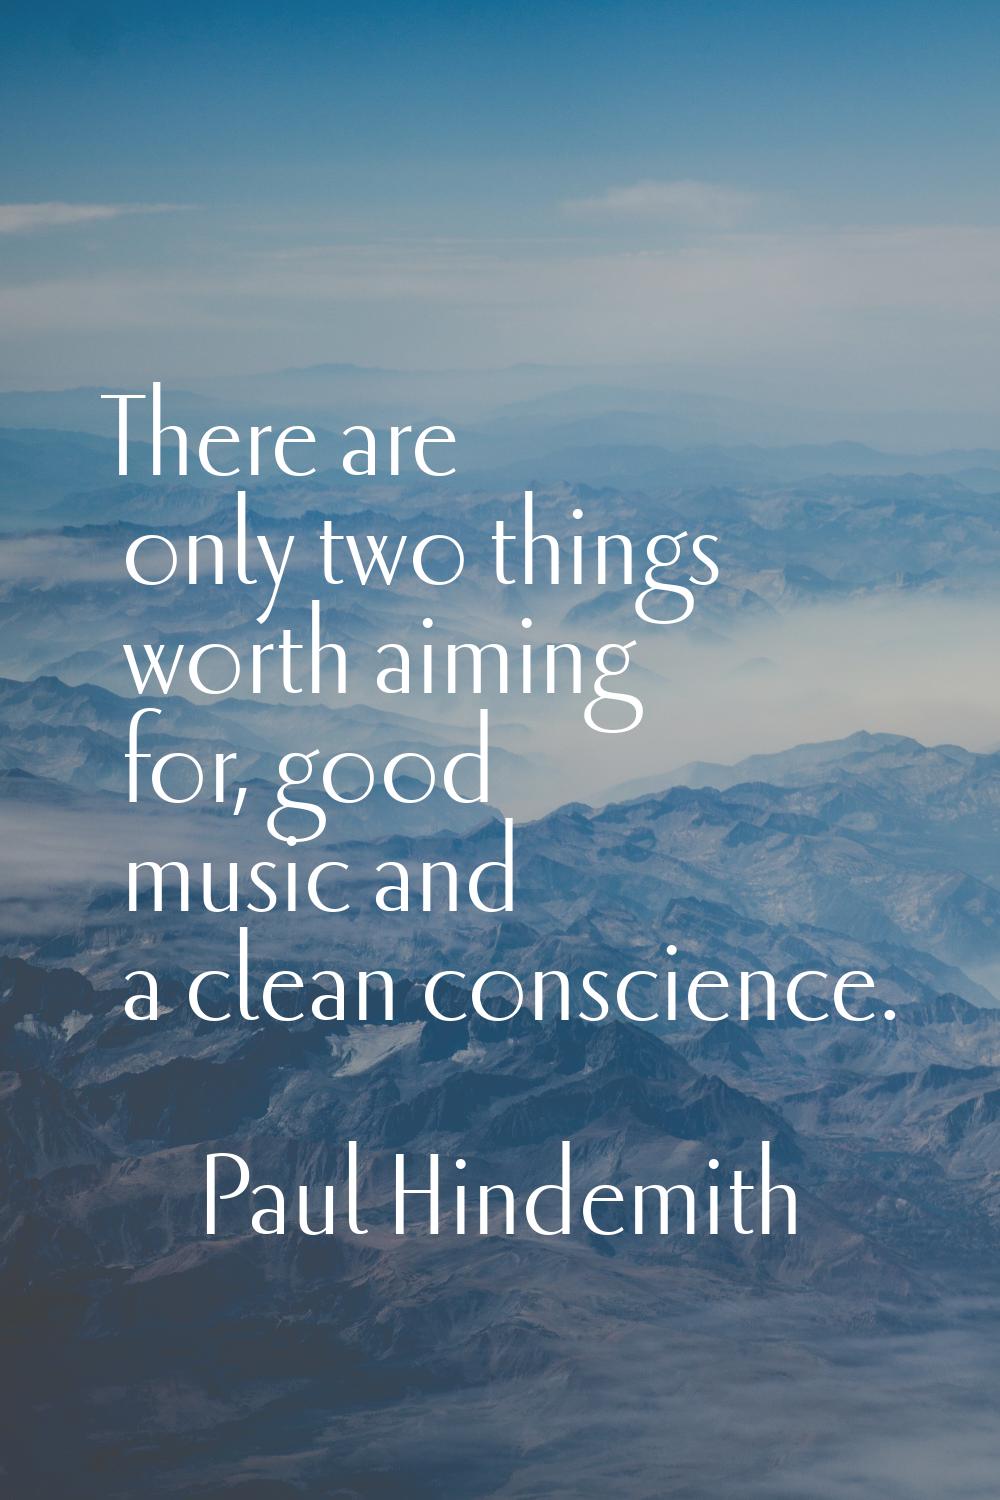 There are only two things worth aiming for, good music and a clean conscience.